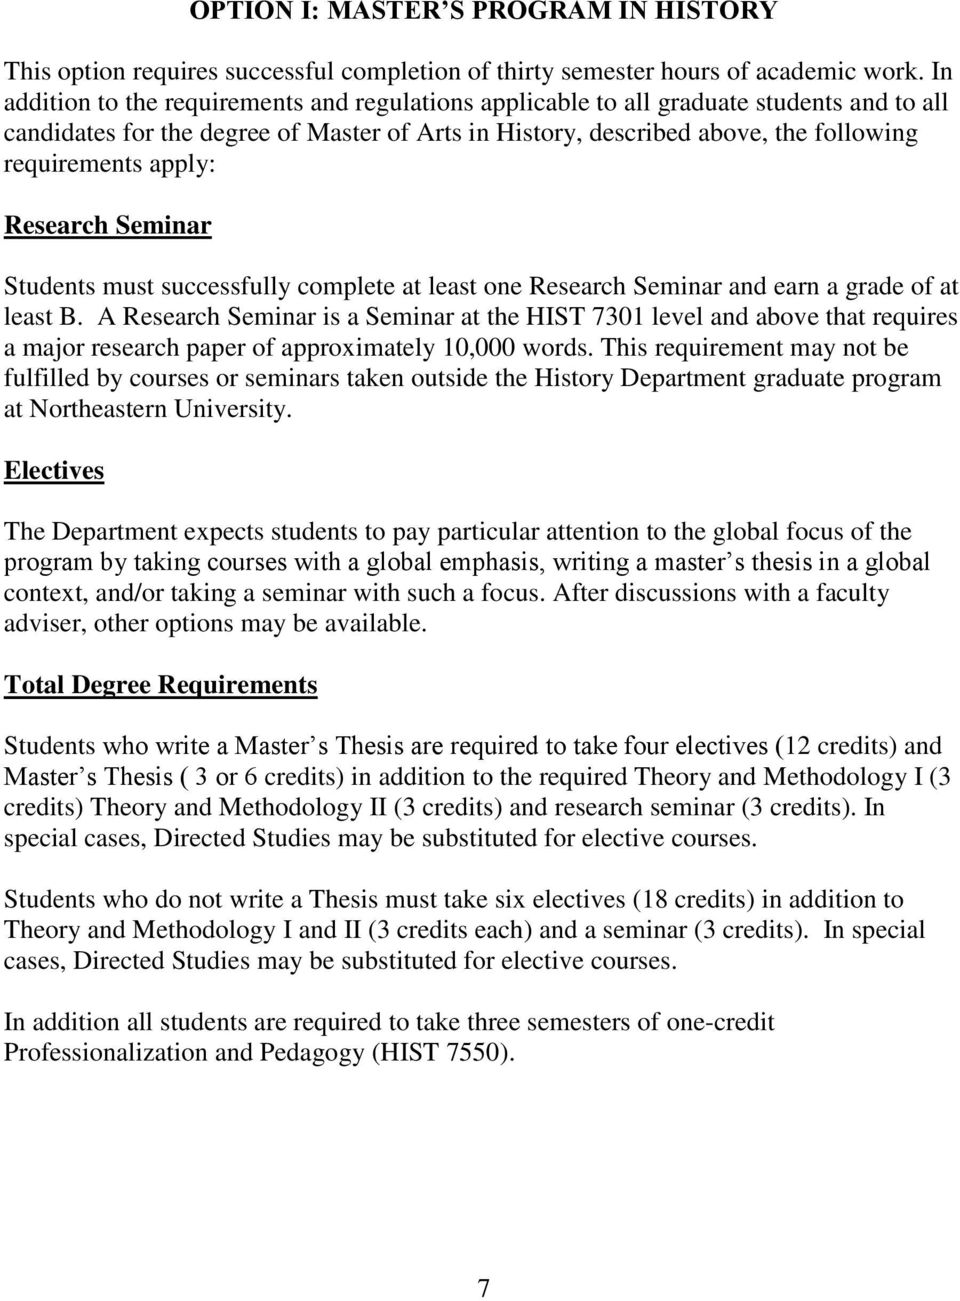 apply: Research Seminar Students must successfully complete at least one Research Seminar and earn a grade of at least B.